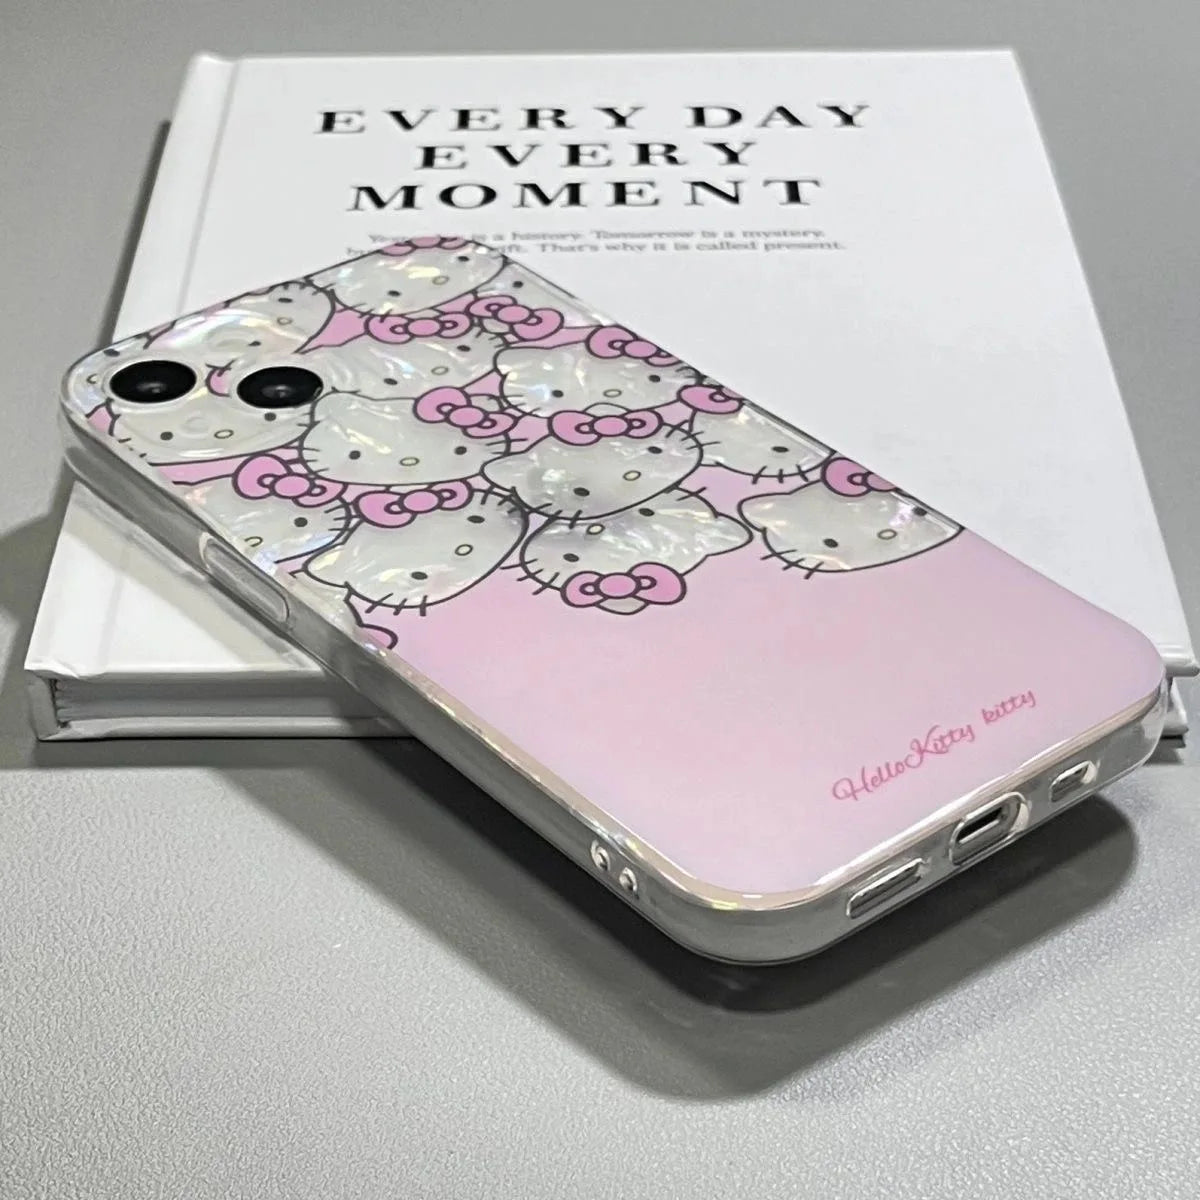 Cute HELLO KITTY Pink iPhone Cases